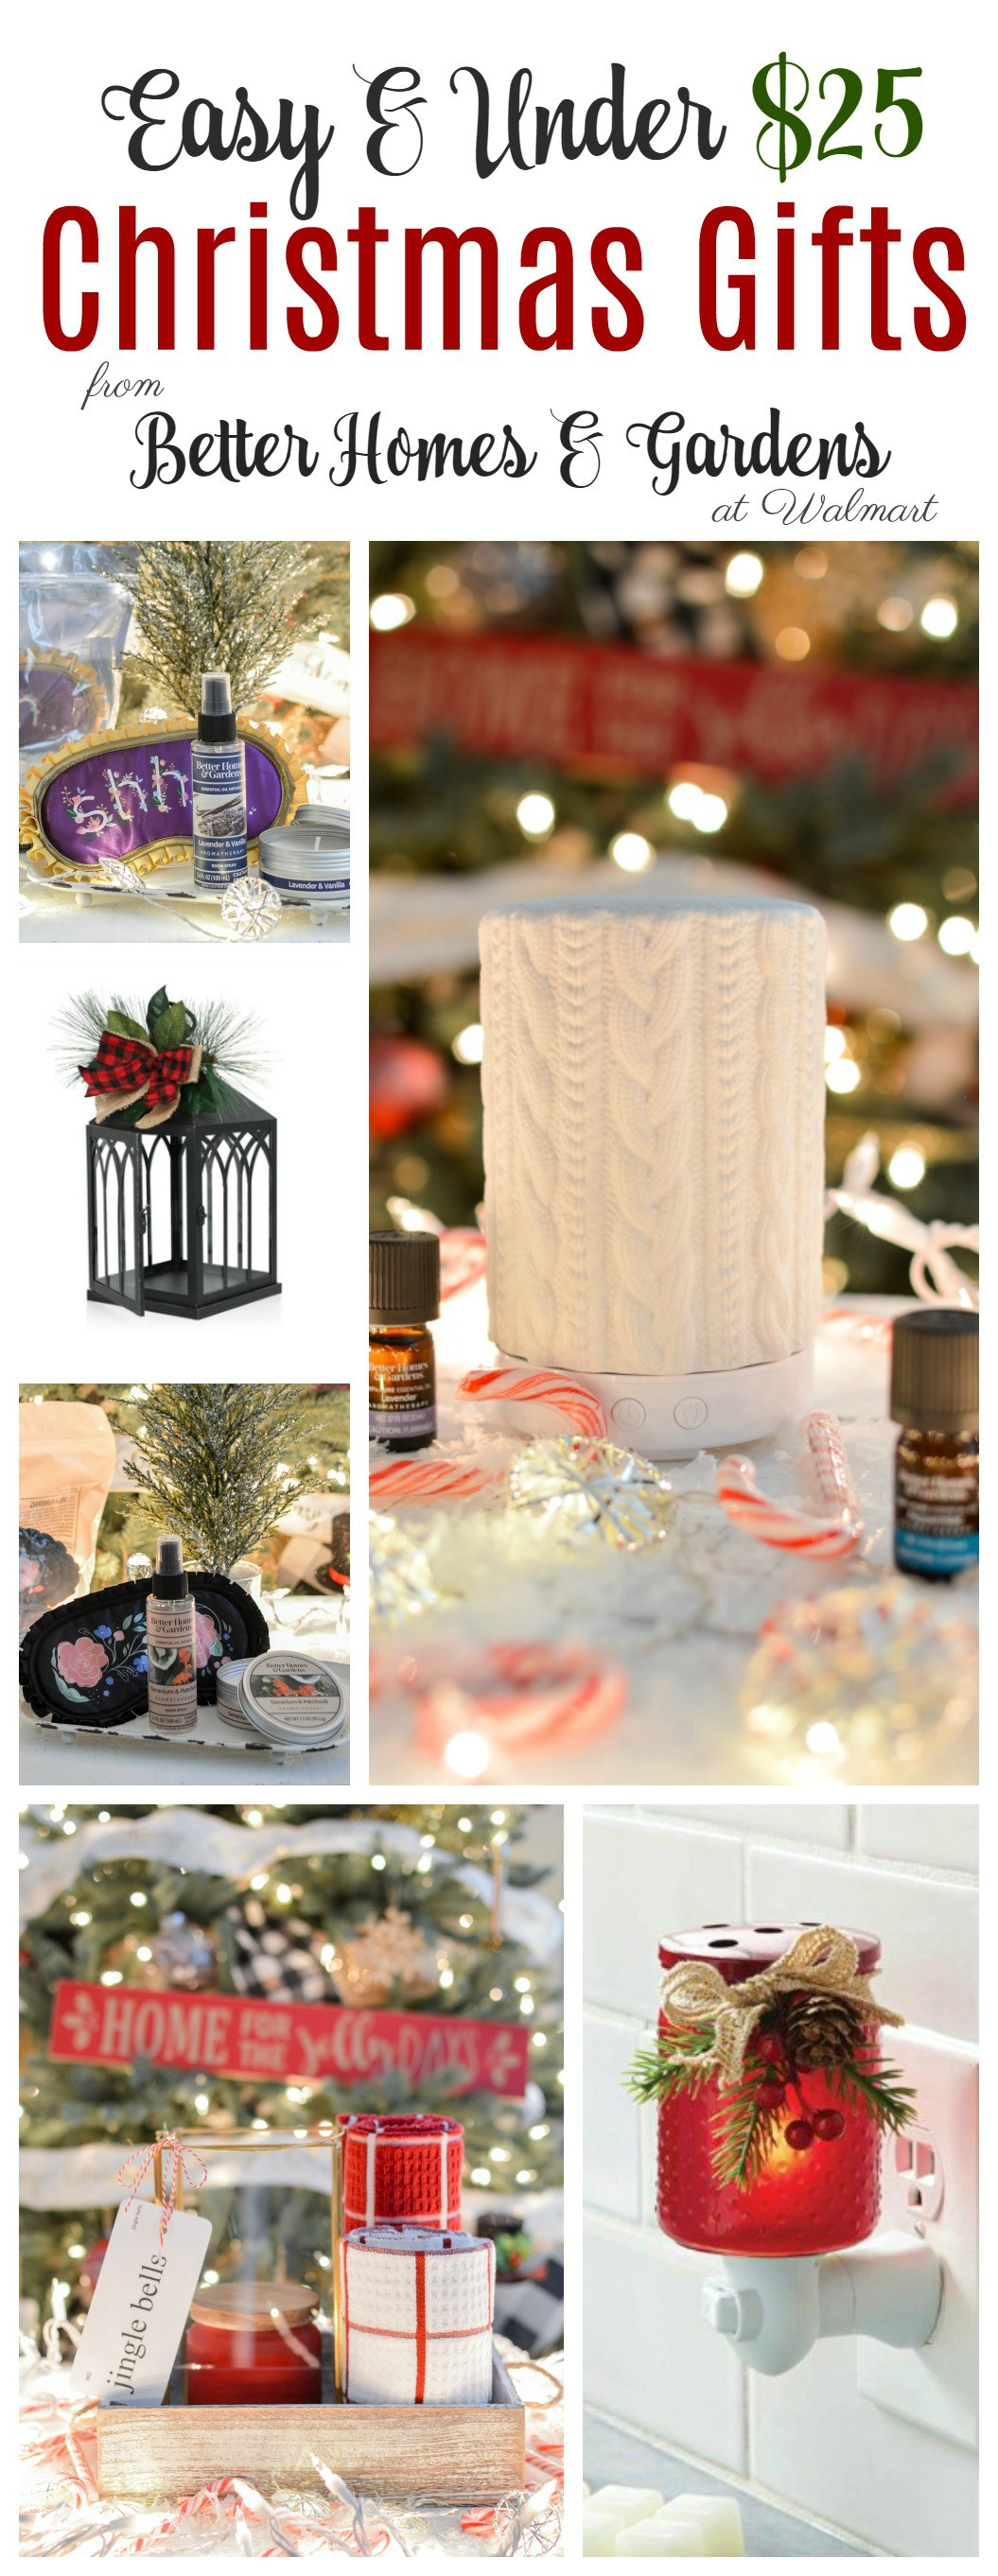 $25 Christmas Gift Ideas
 Cute Christmas Gift Ideas Under $25 with Better Homes